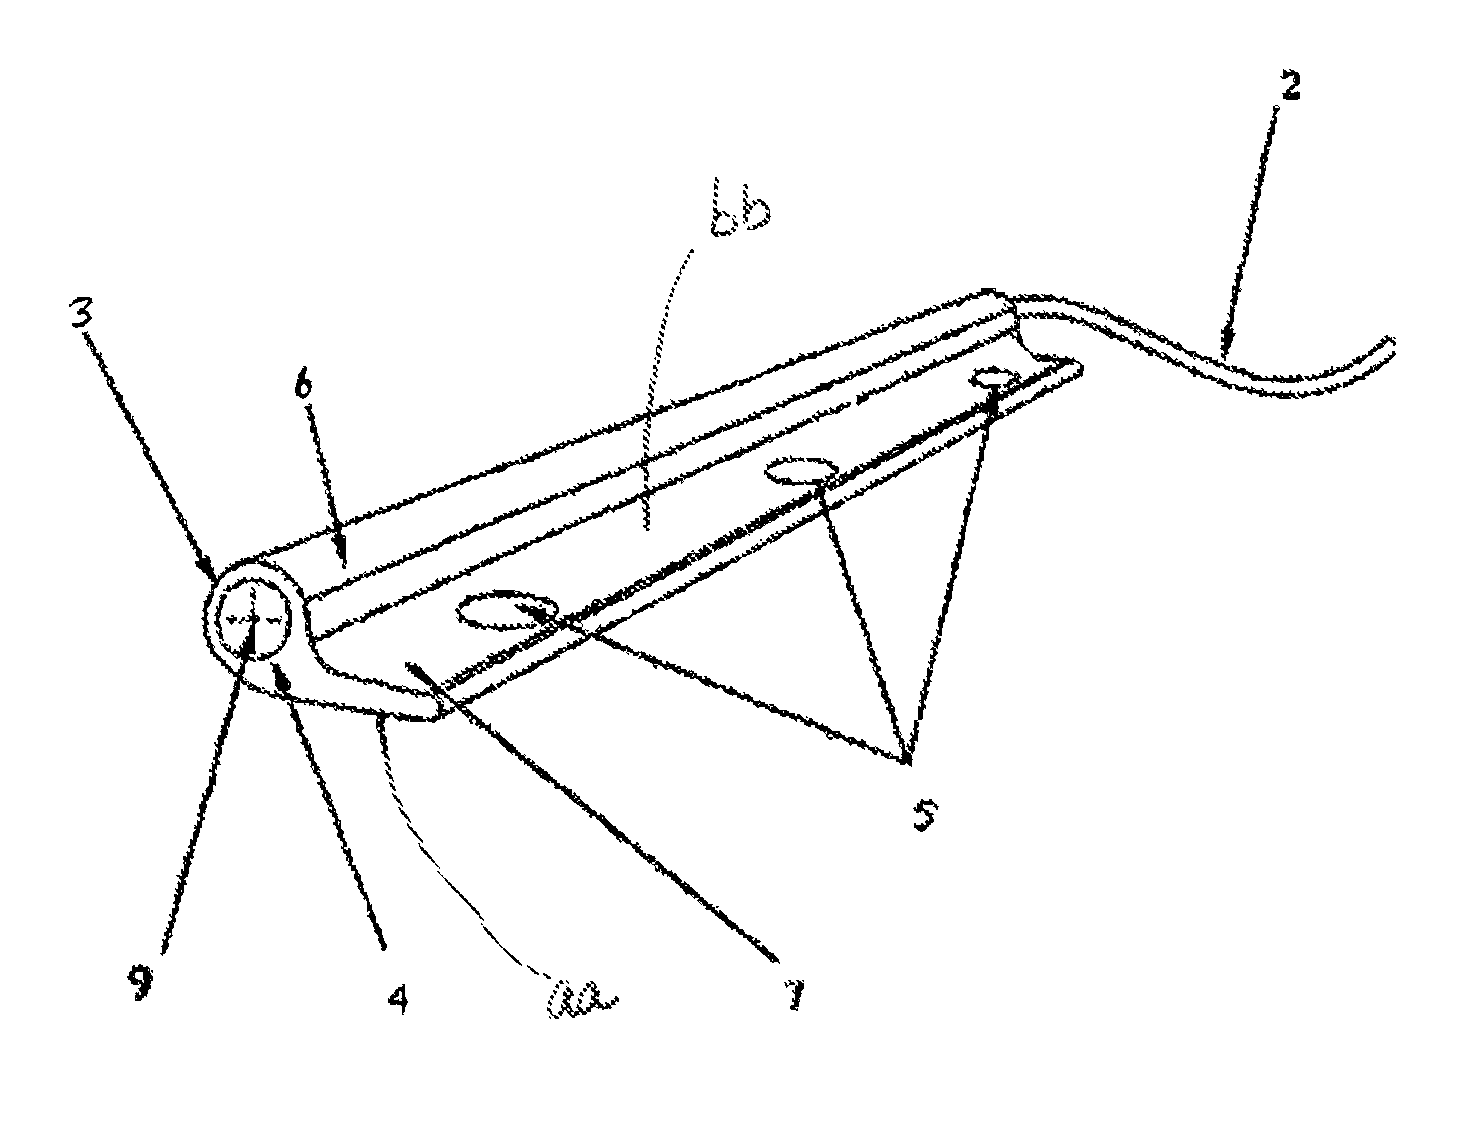 Attachable portable illumination apparatus for surgical instruments